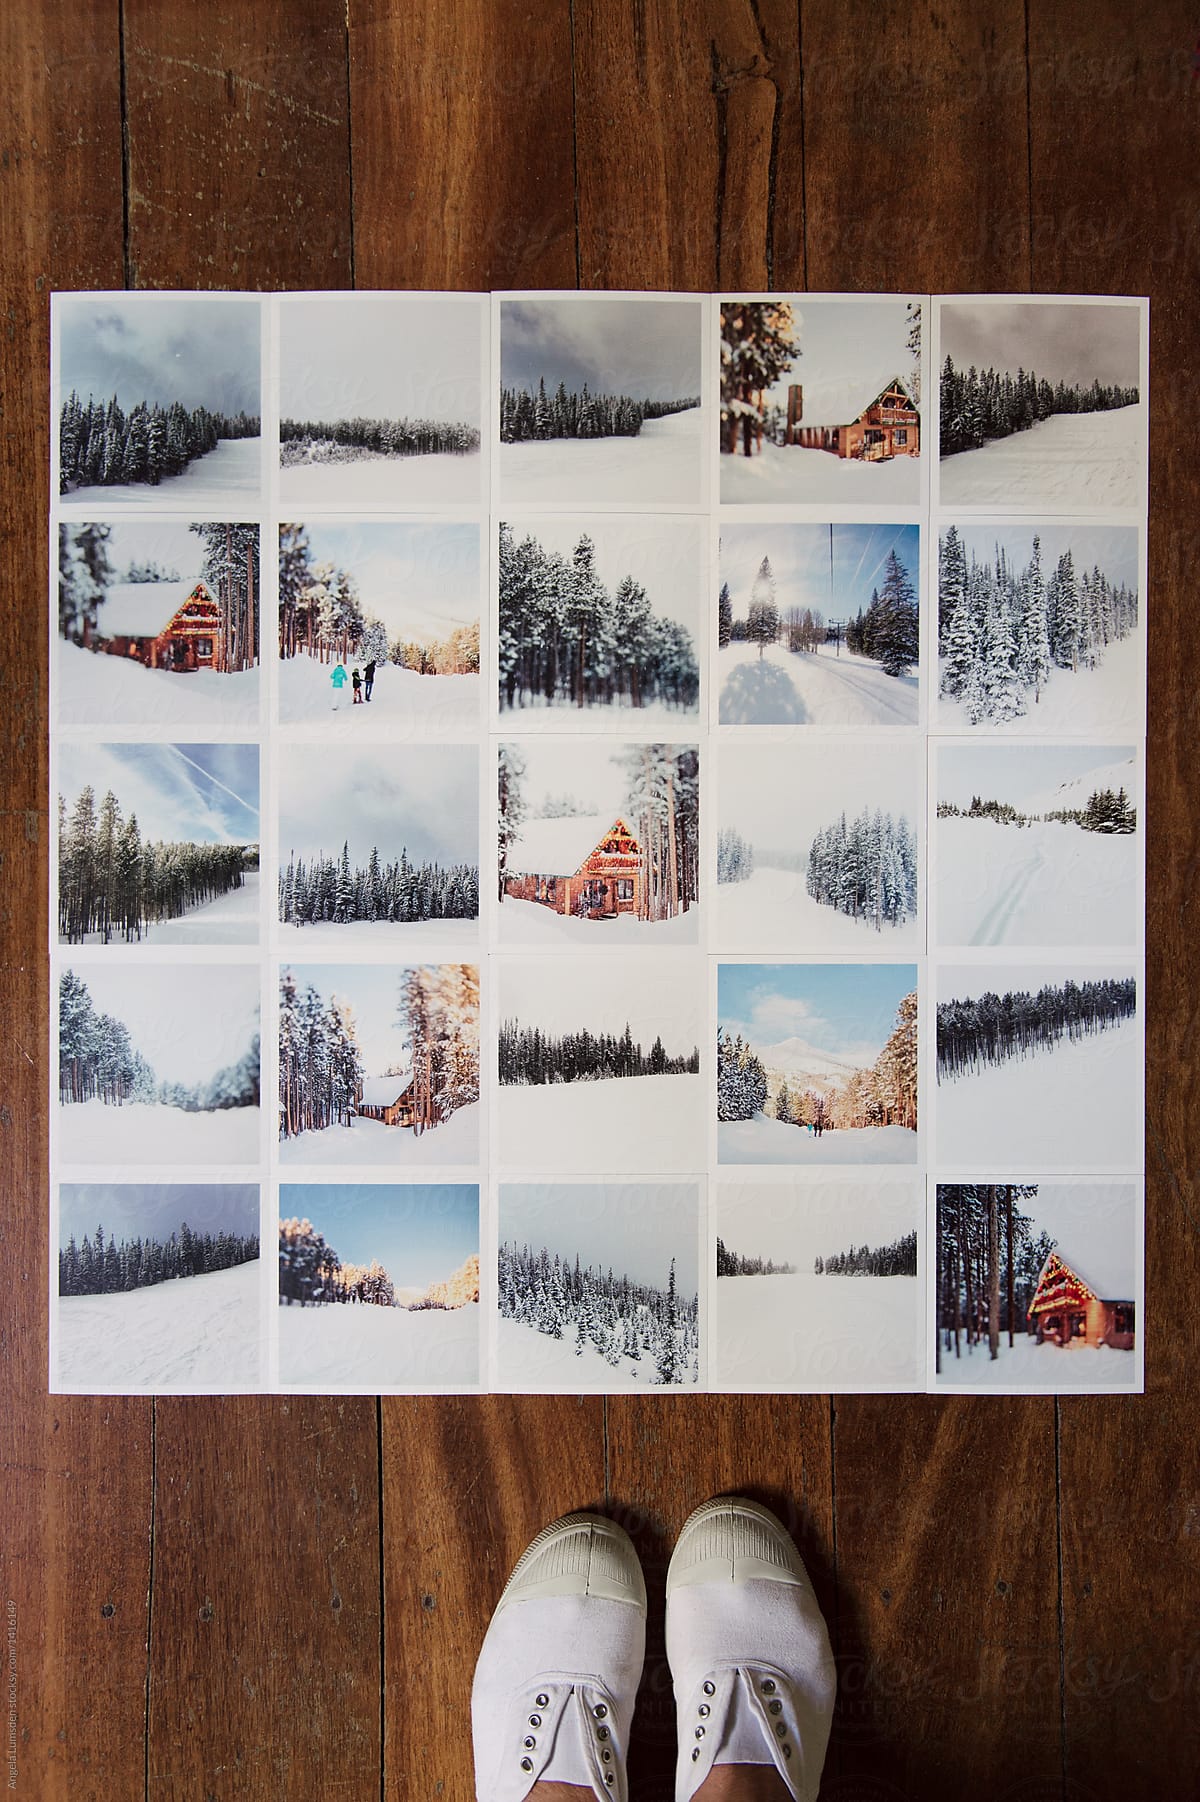 Photo prints laid out in a grid for framing